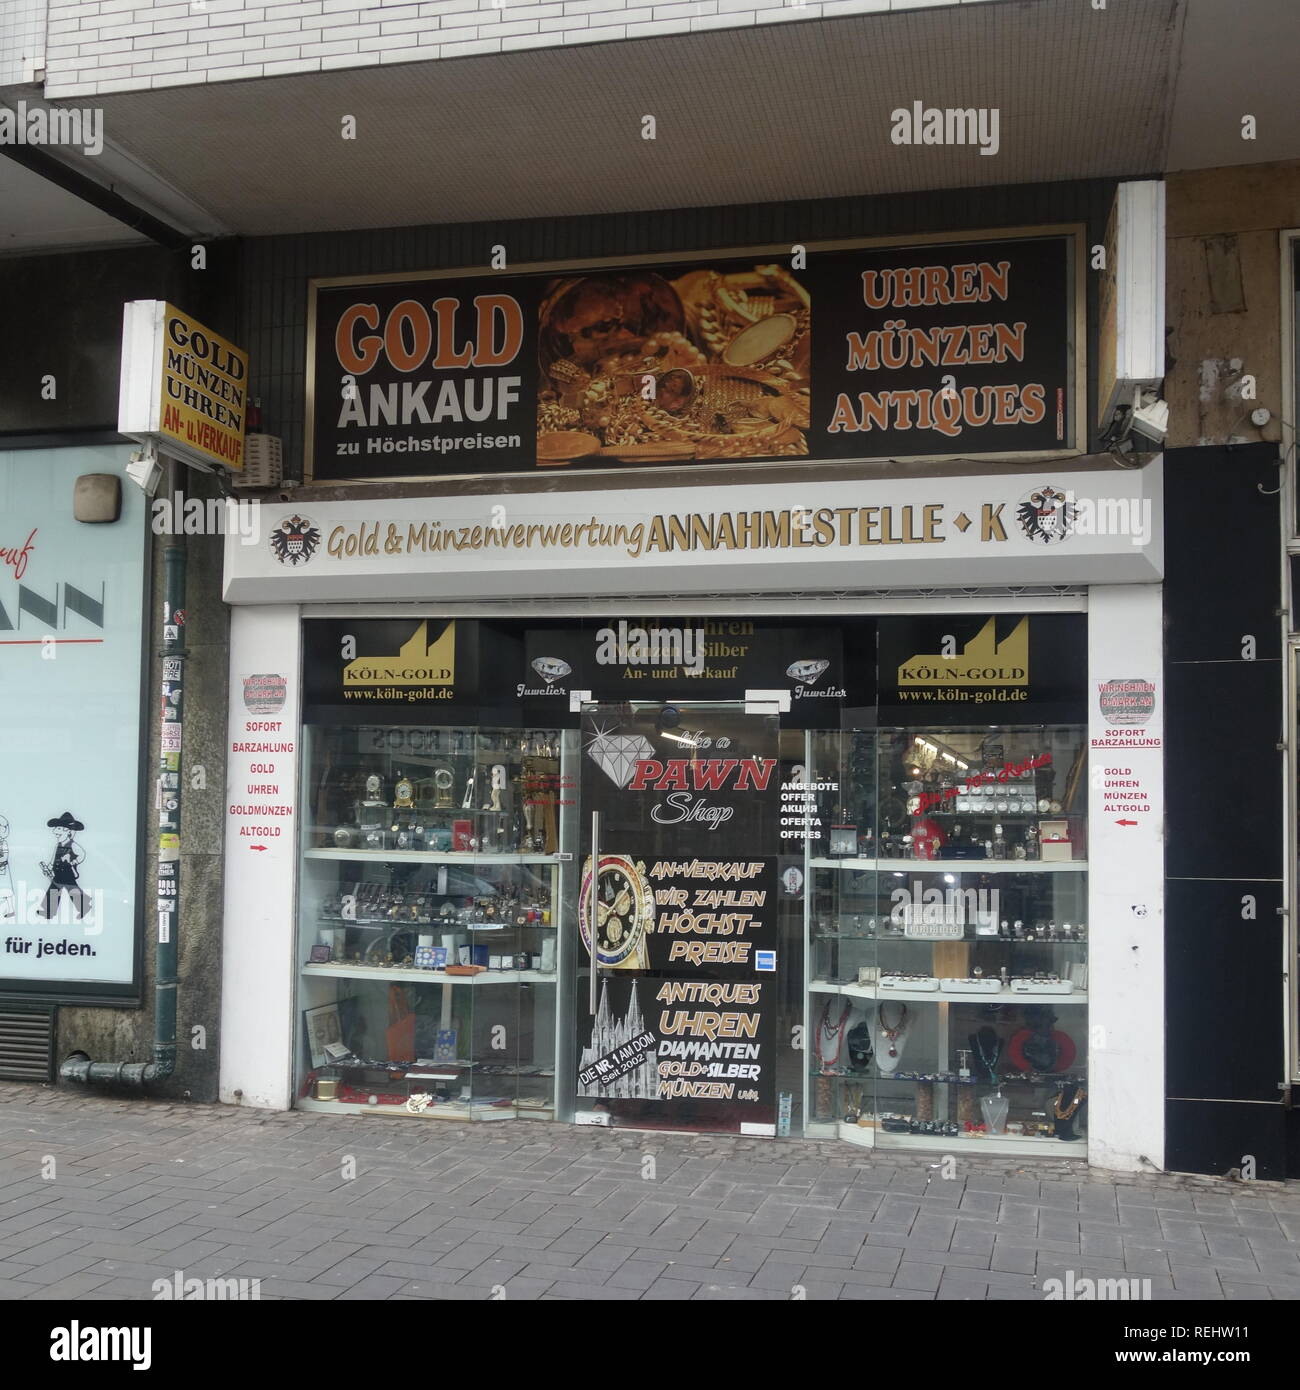 Köln-Gold by Ronny, a pawn shop and gold buyers on Unter Taschenmacher in Cologne, Germany. Stock Photo